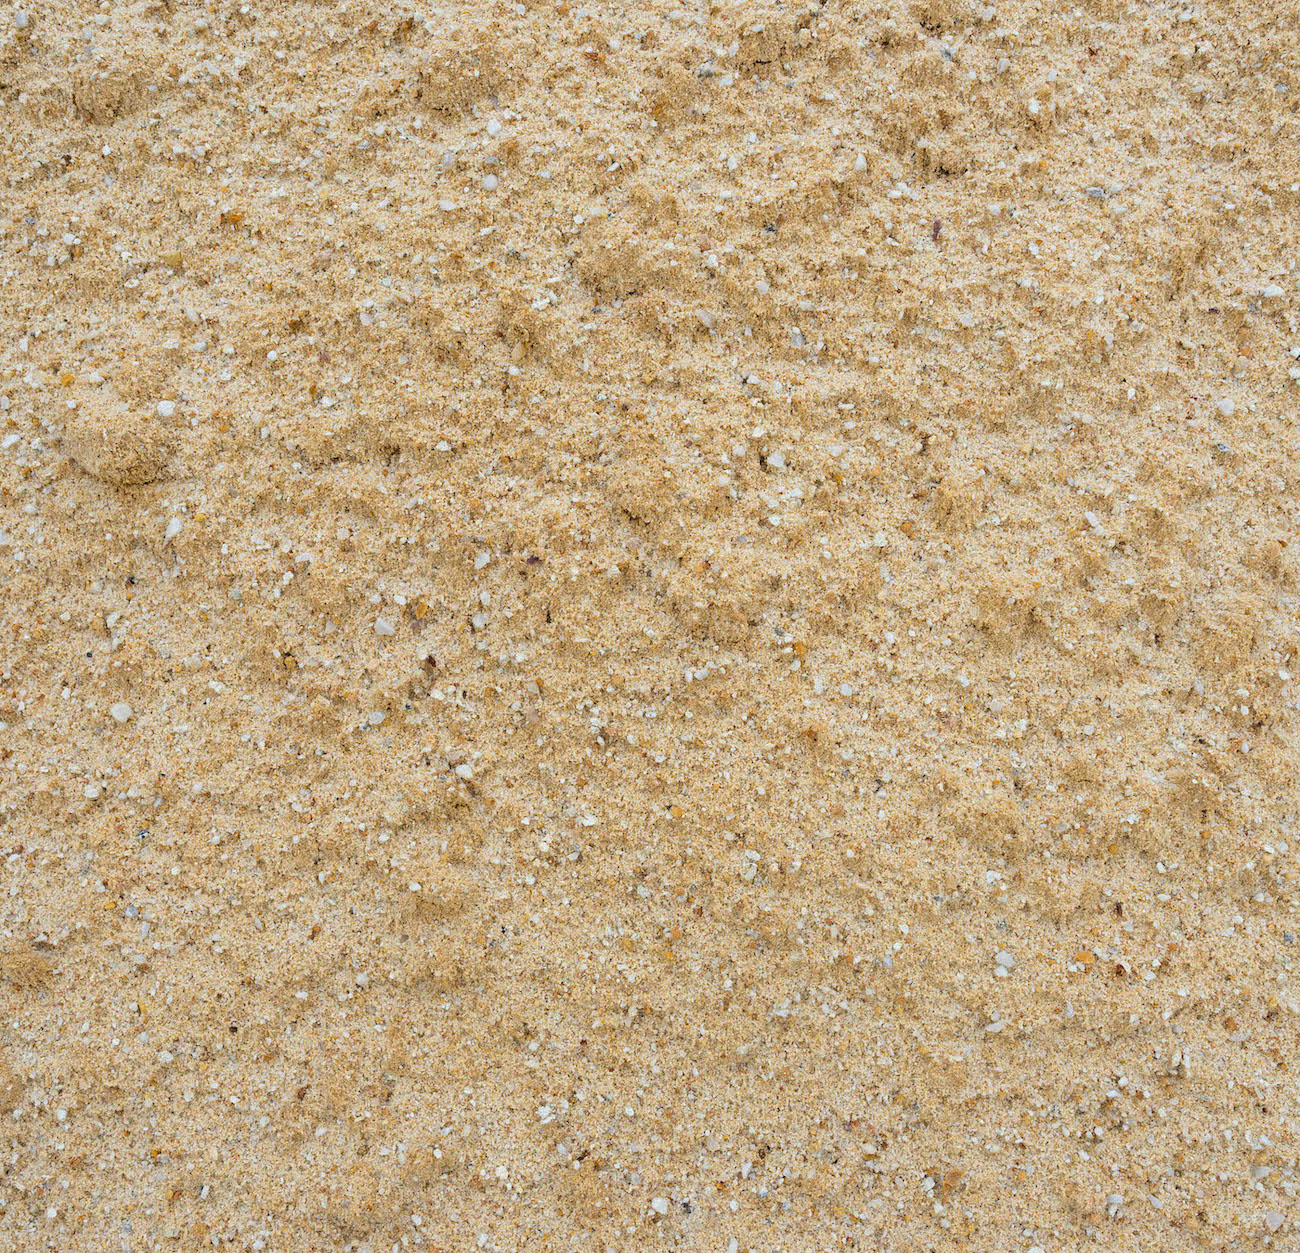 Product Image - Natural Stone & Mulch